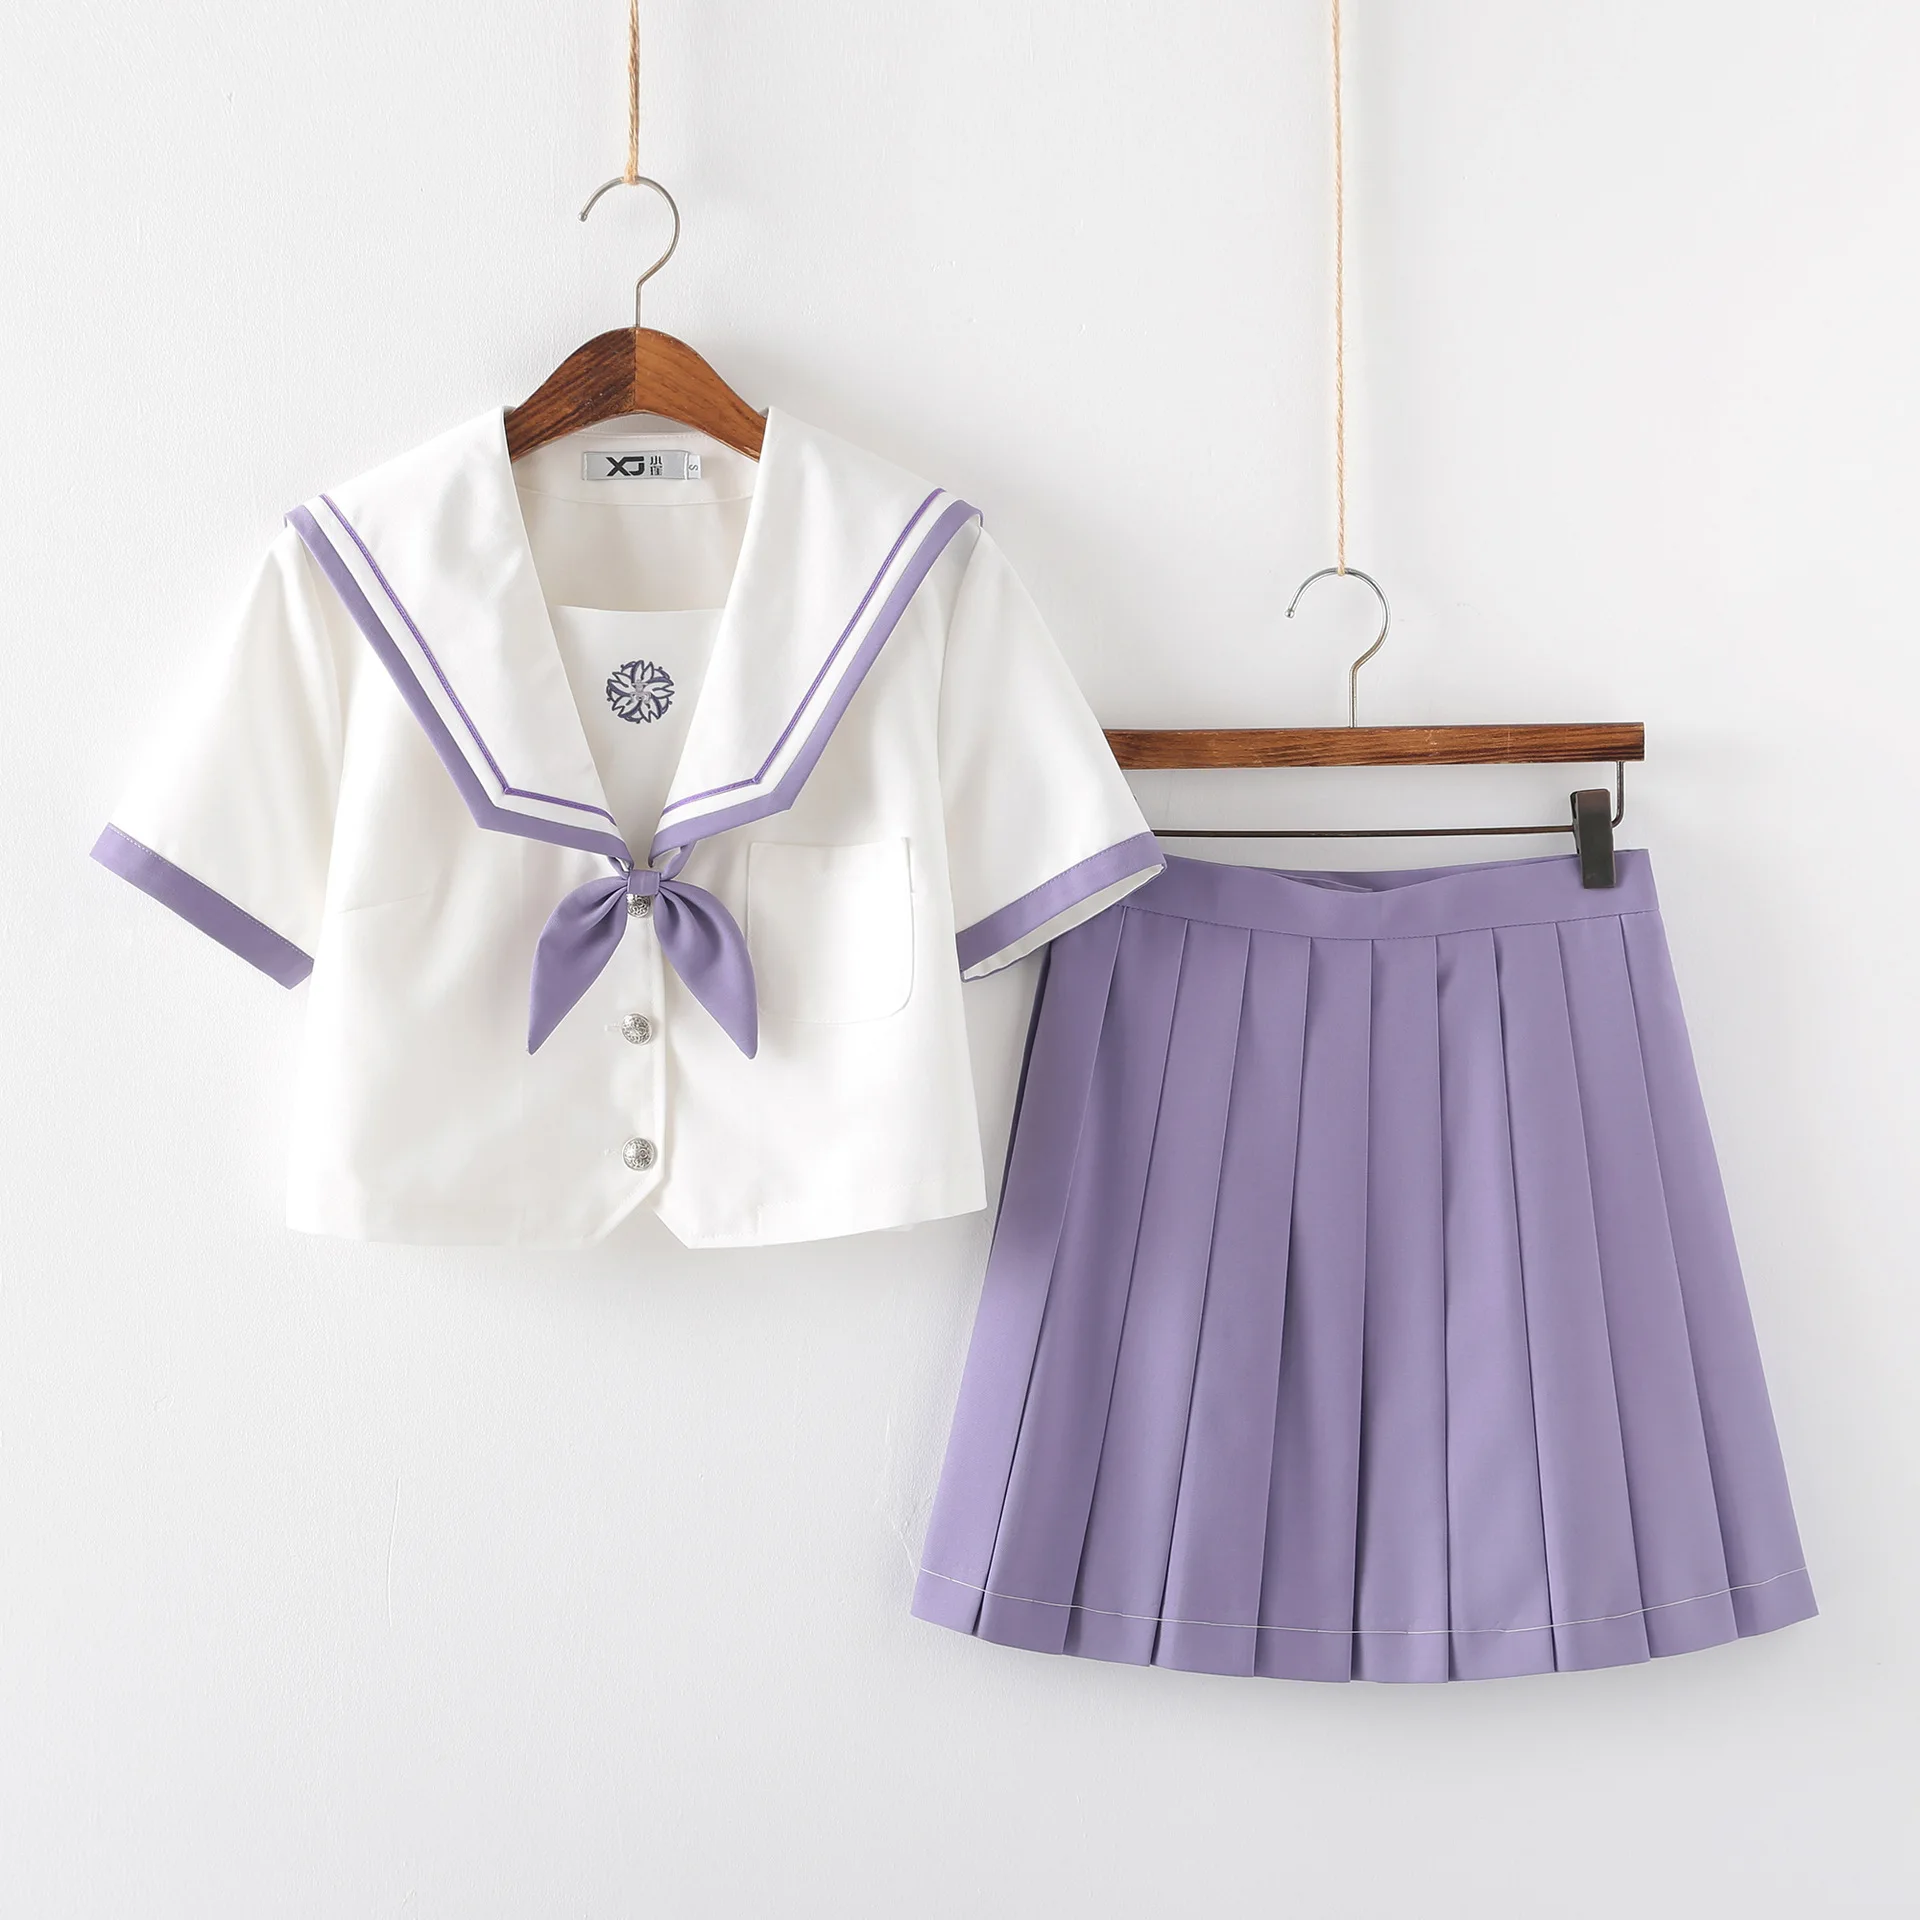 Girl Short Skirt Japanese Style Jk School Uniform Japan College Stage Dance Sailor Costume Pleated Anime Cosplay Tops And Skirt